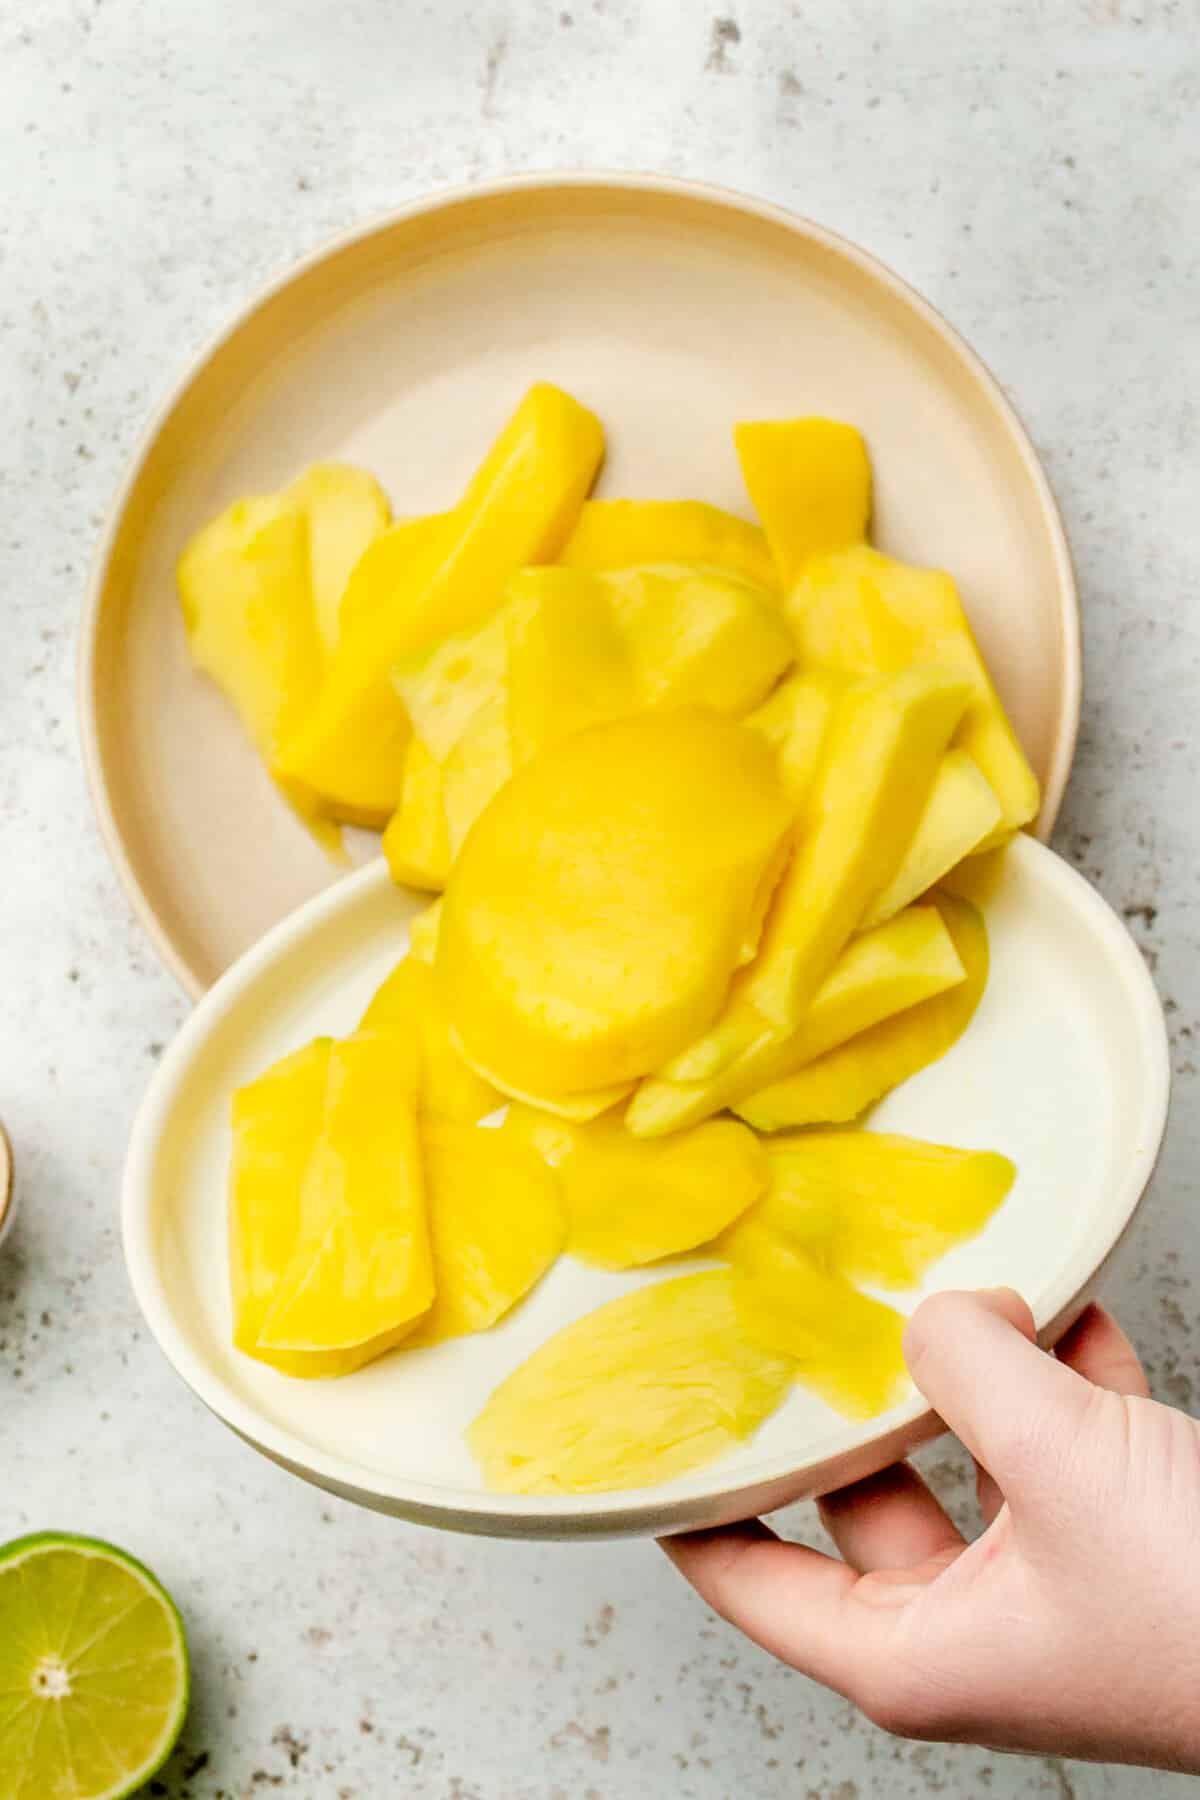 Slices of mango are tossed into a shallow bowl on a light grey colored surface.